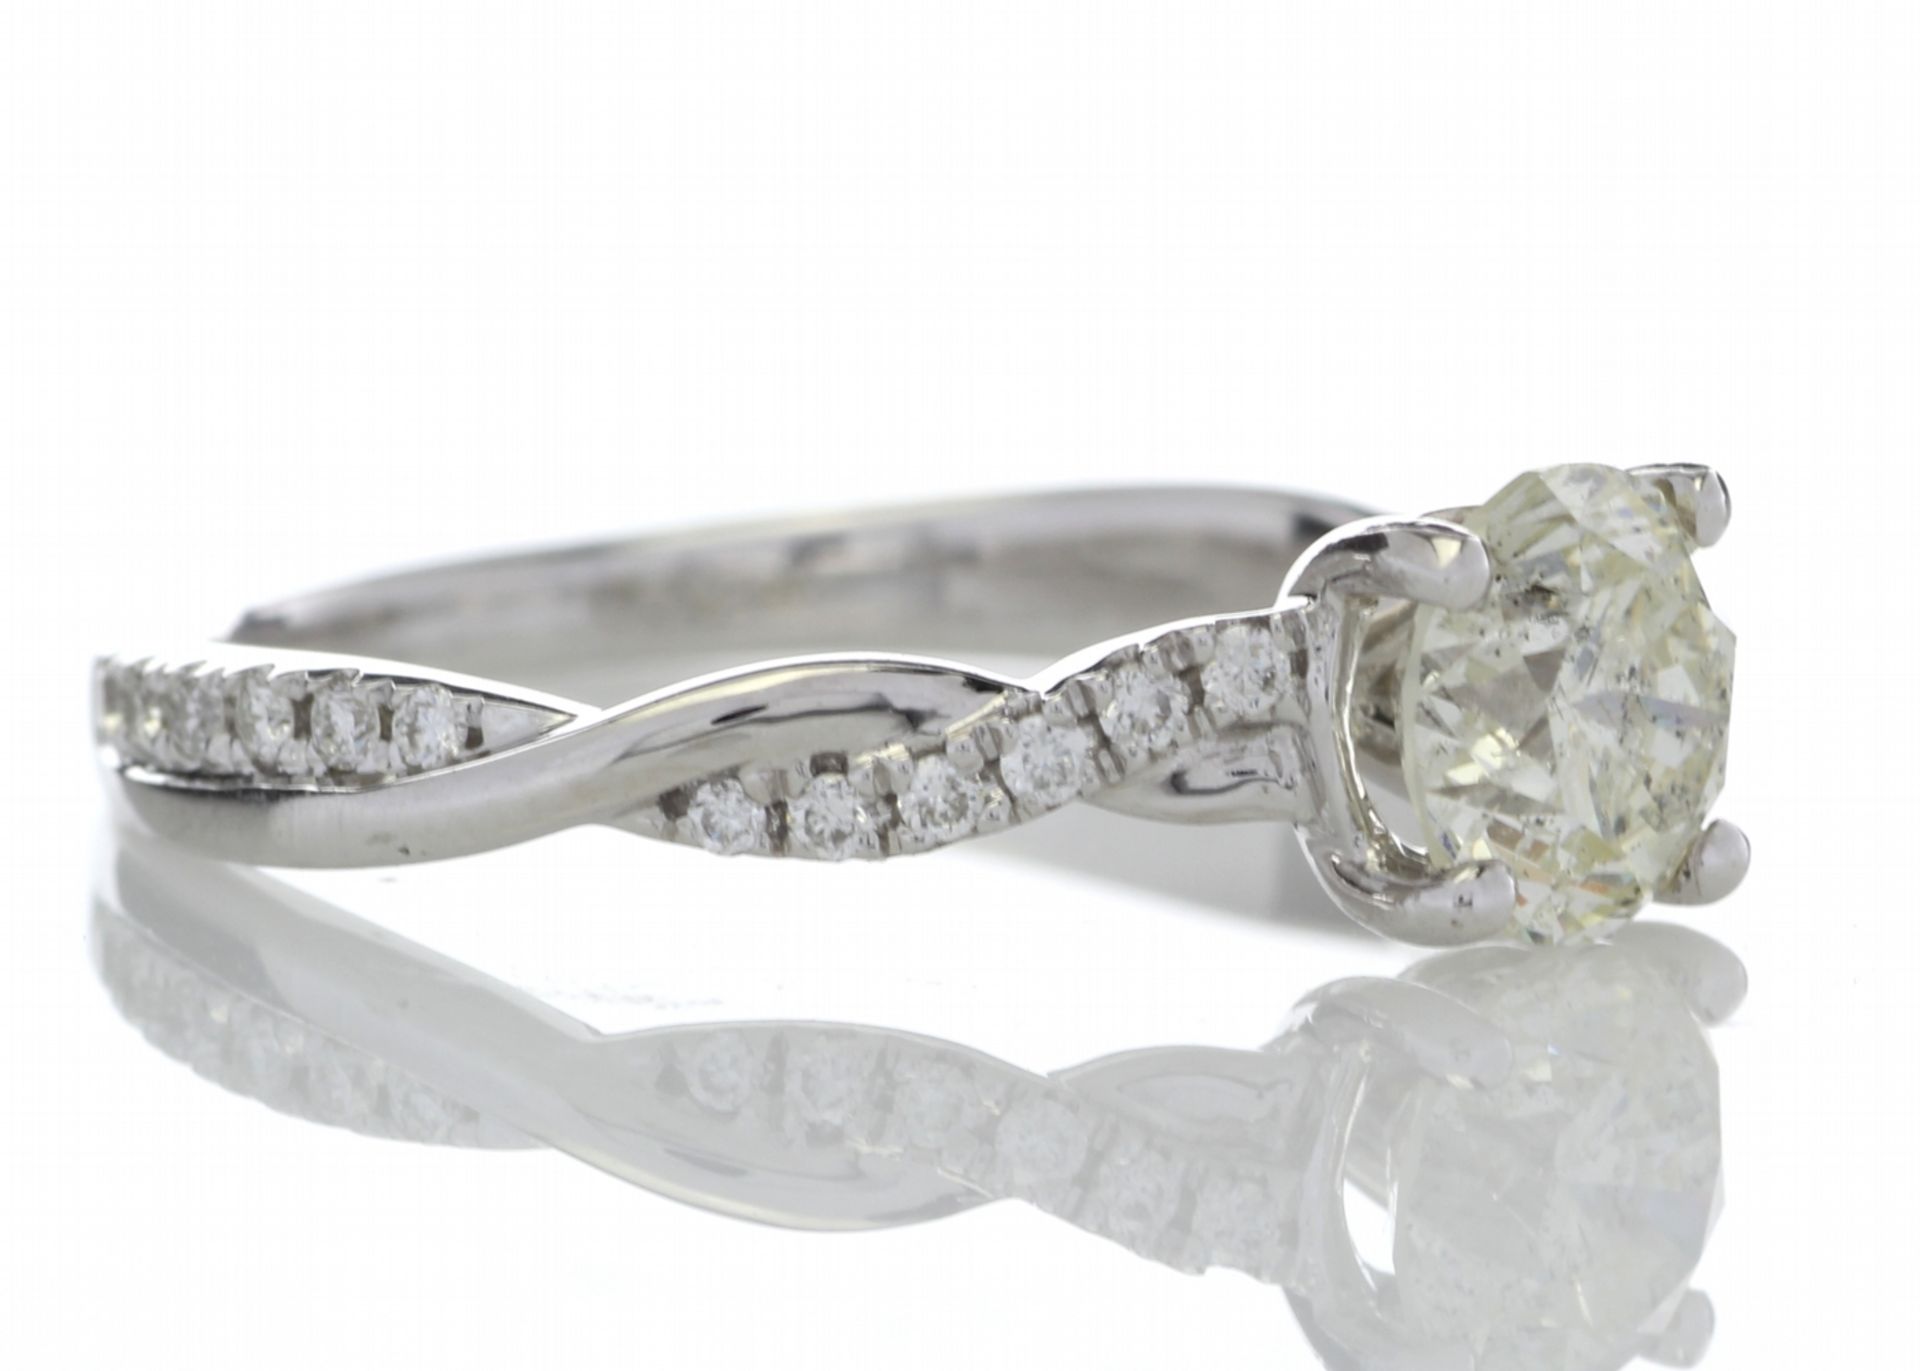 18ct White Gold Single Stone Diamond Ring With Waved Stone Set Shoulders (1.06) 1.22 - Image 3 of 4